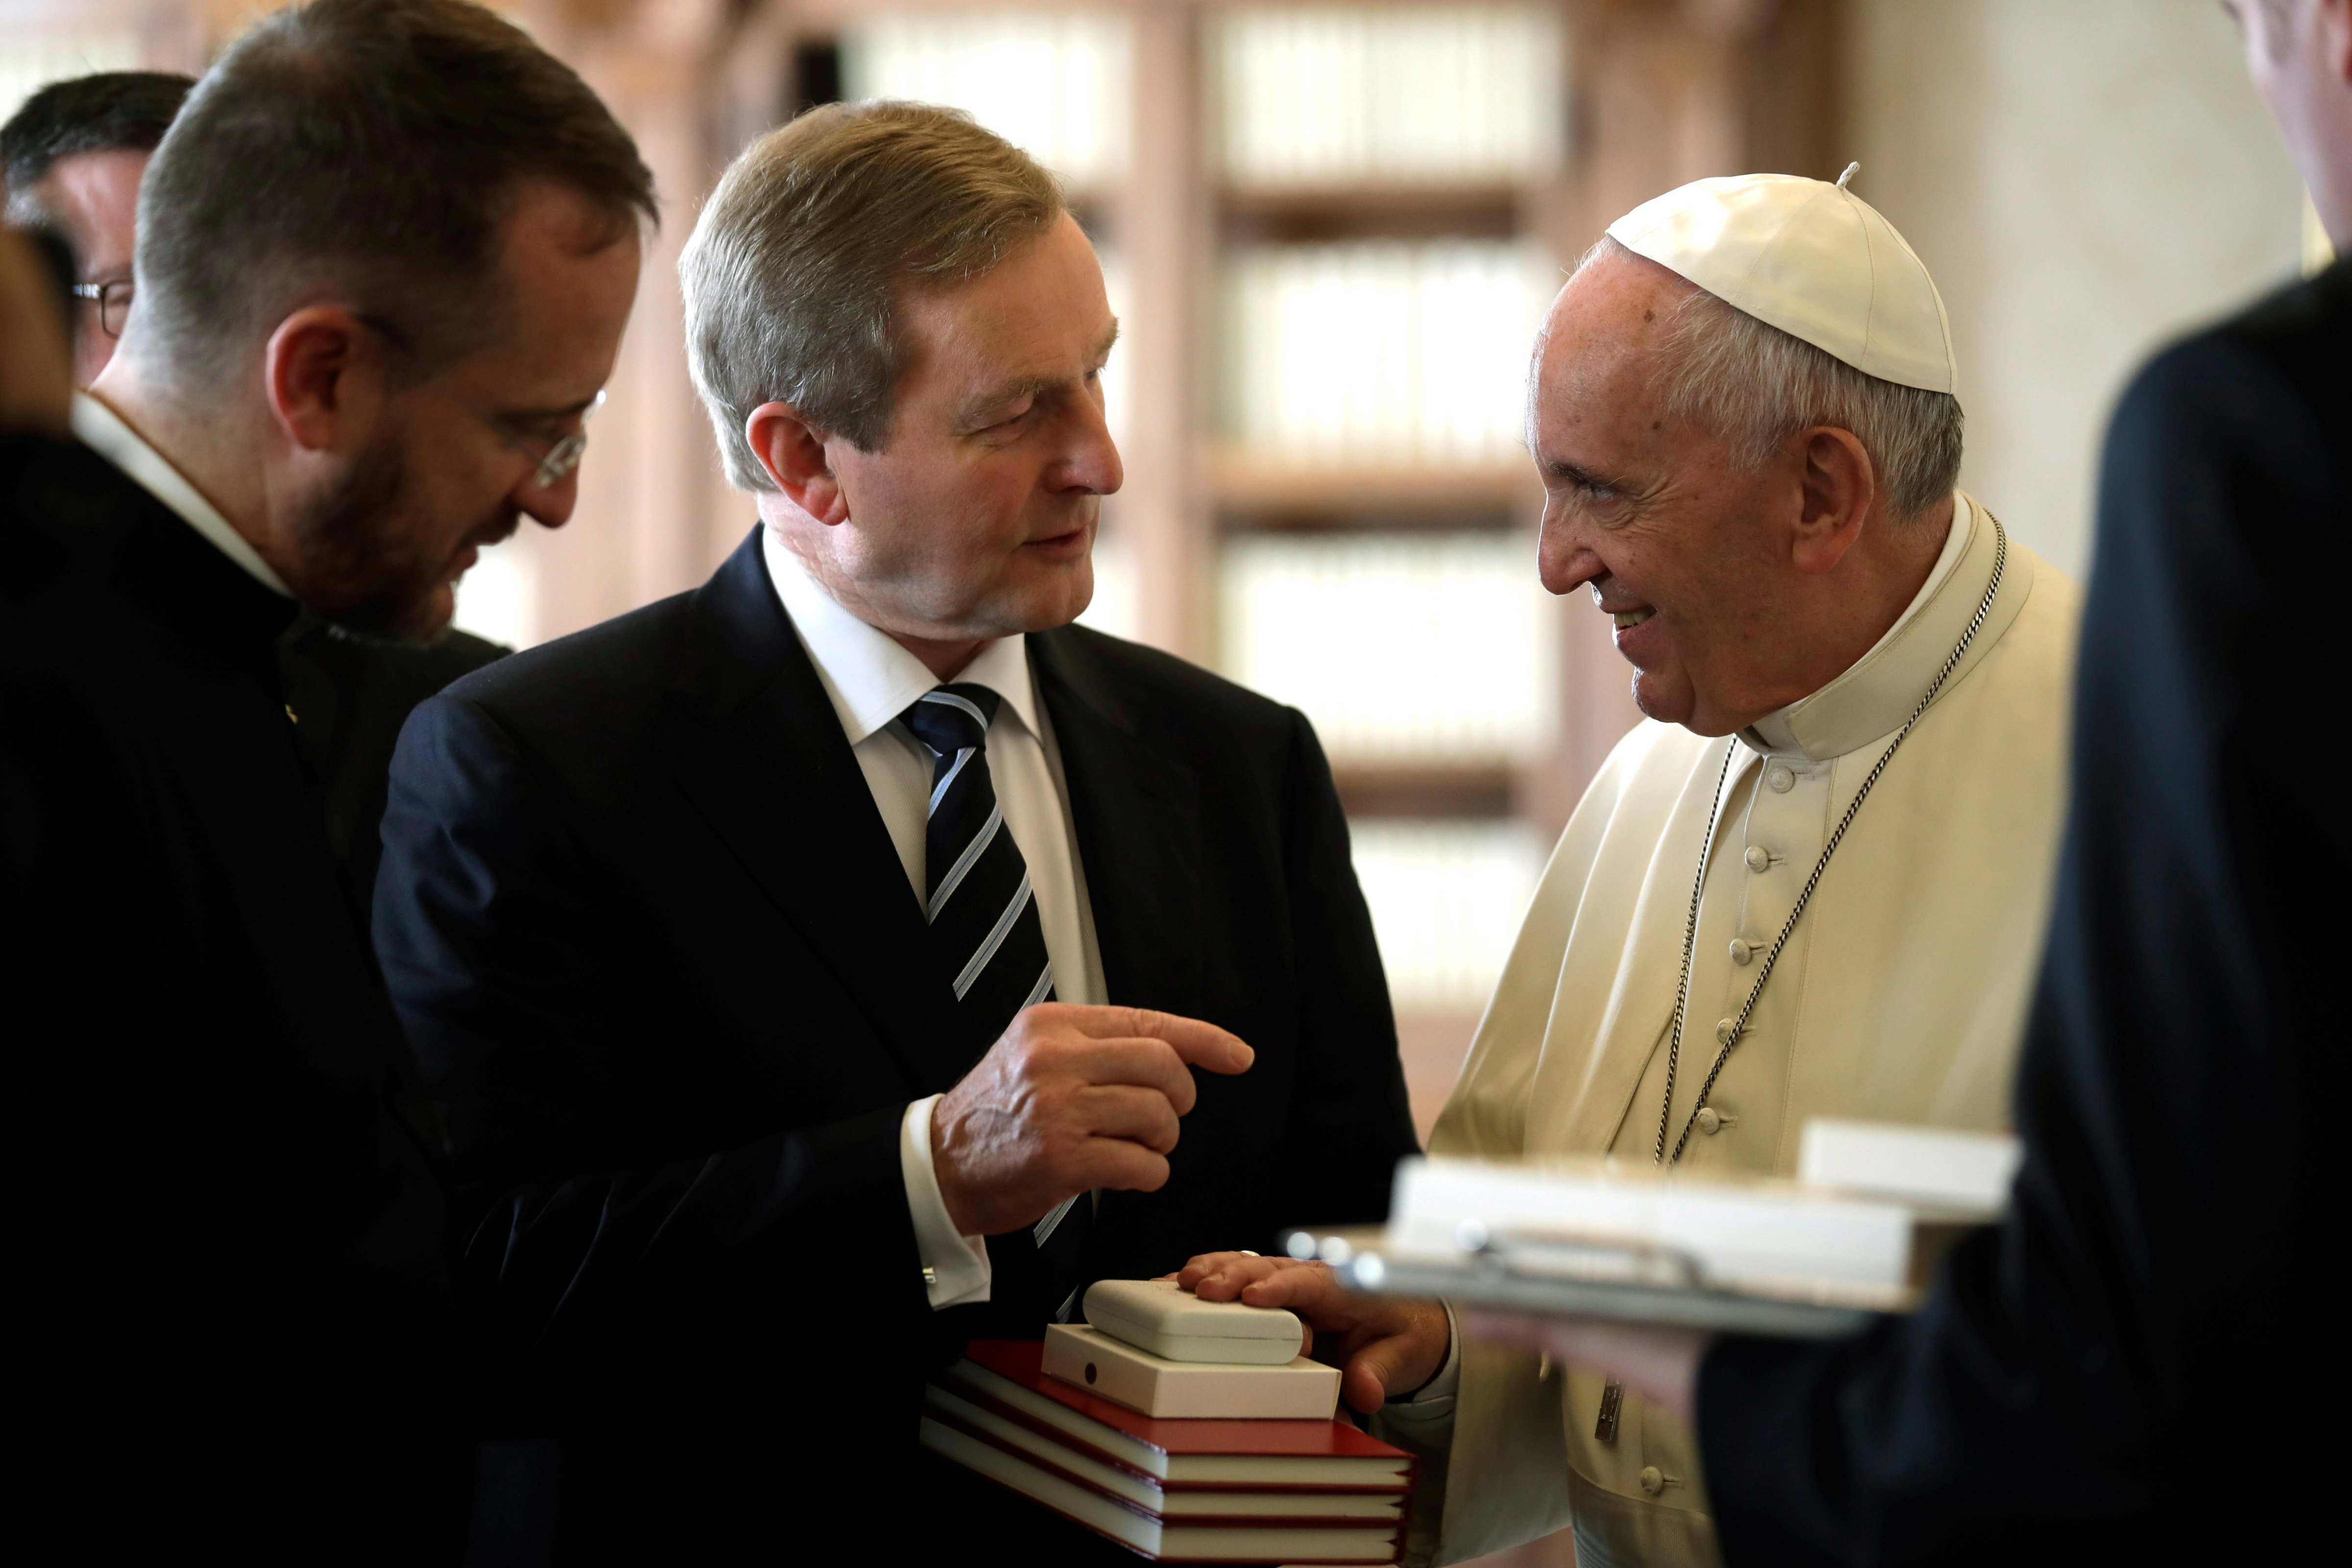 Pope Francis (R) talks with Irish Prime Minister Enda Kenny during a private audience on November 28, 2016 at the Vatican.